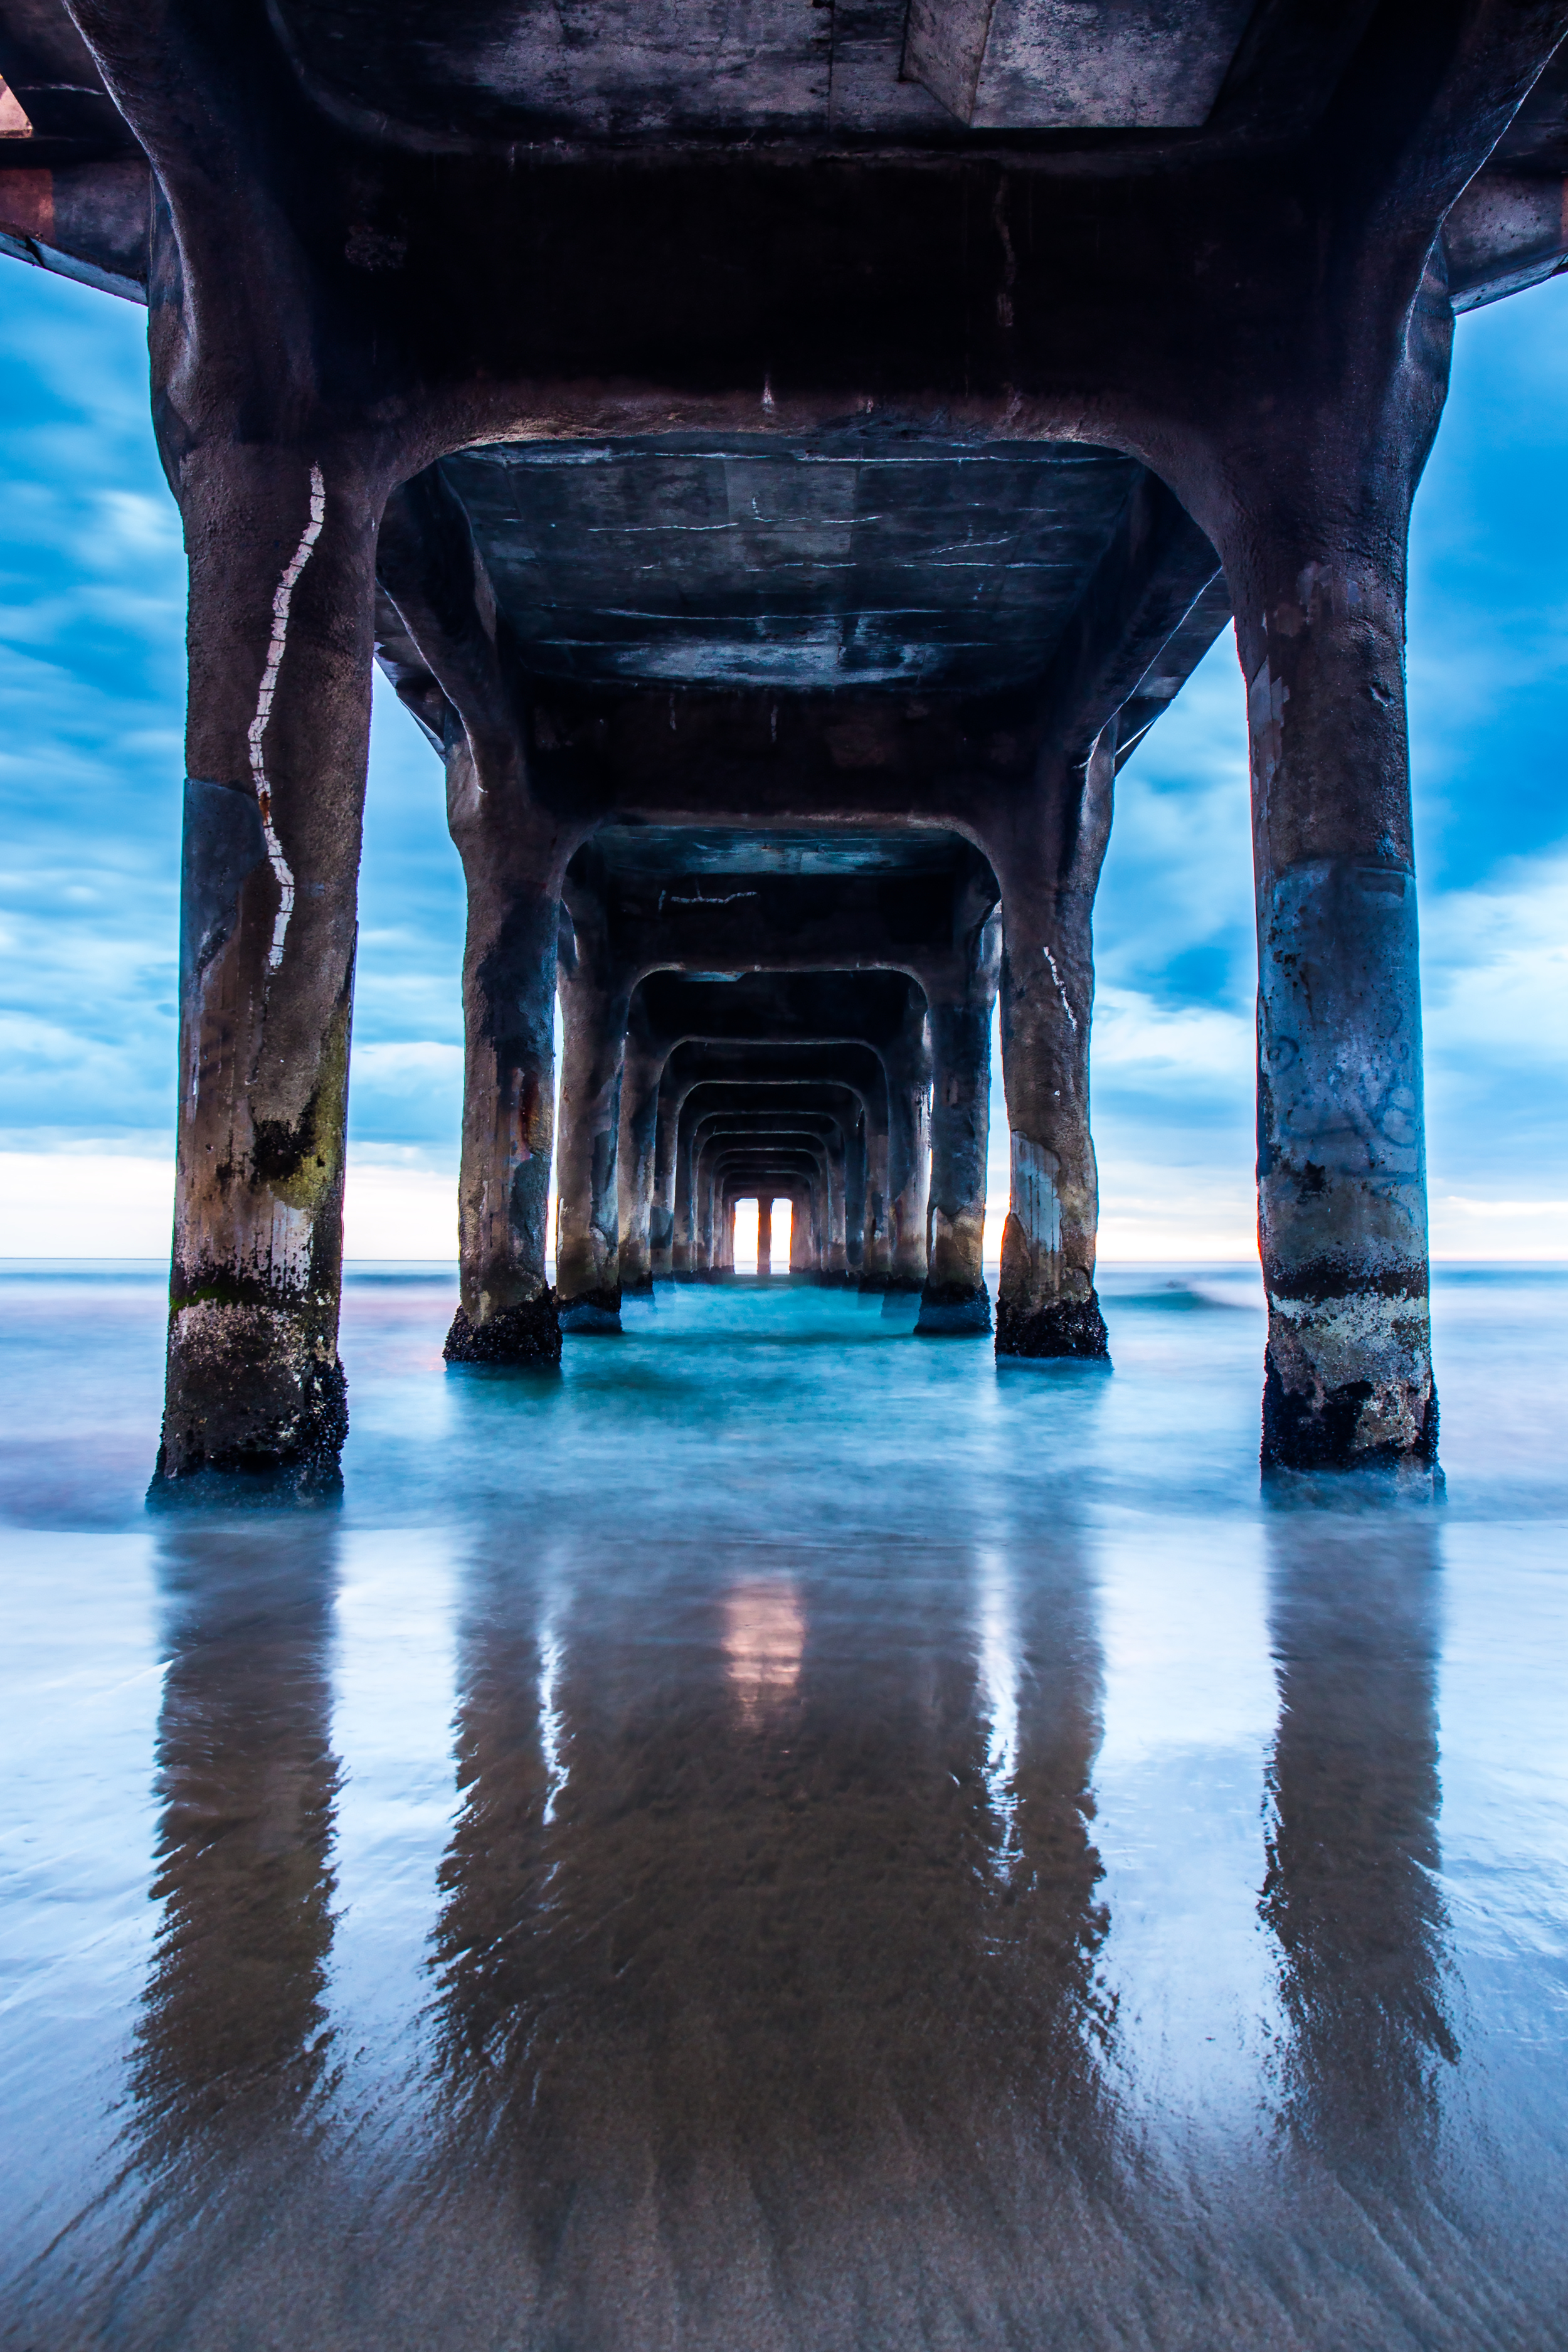 MB Pier at Blue Hour